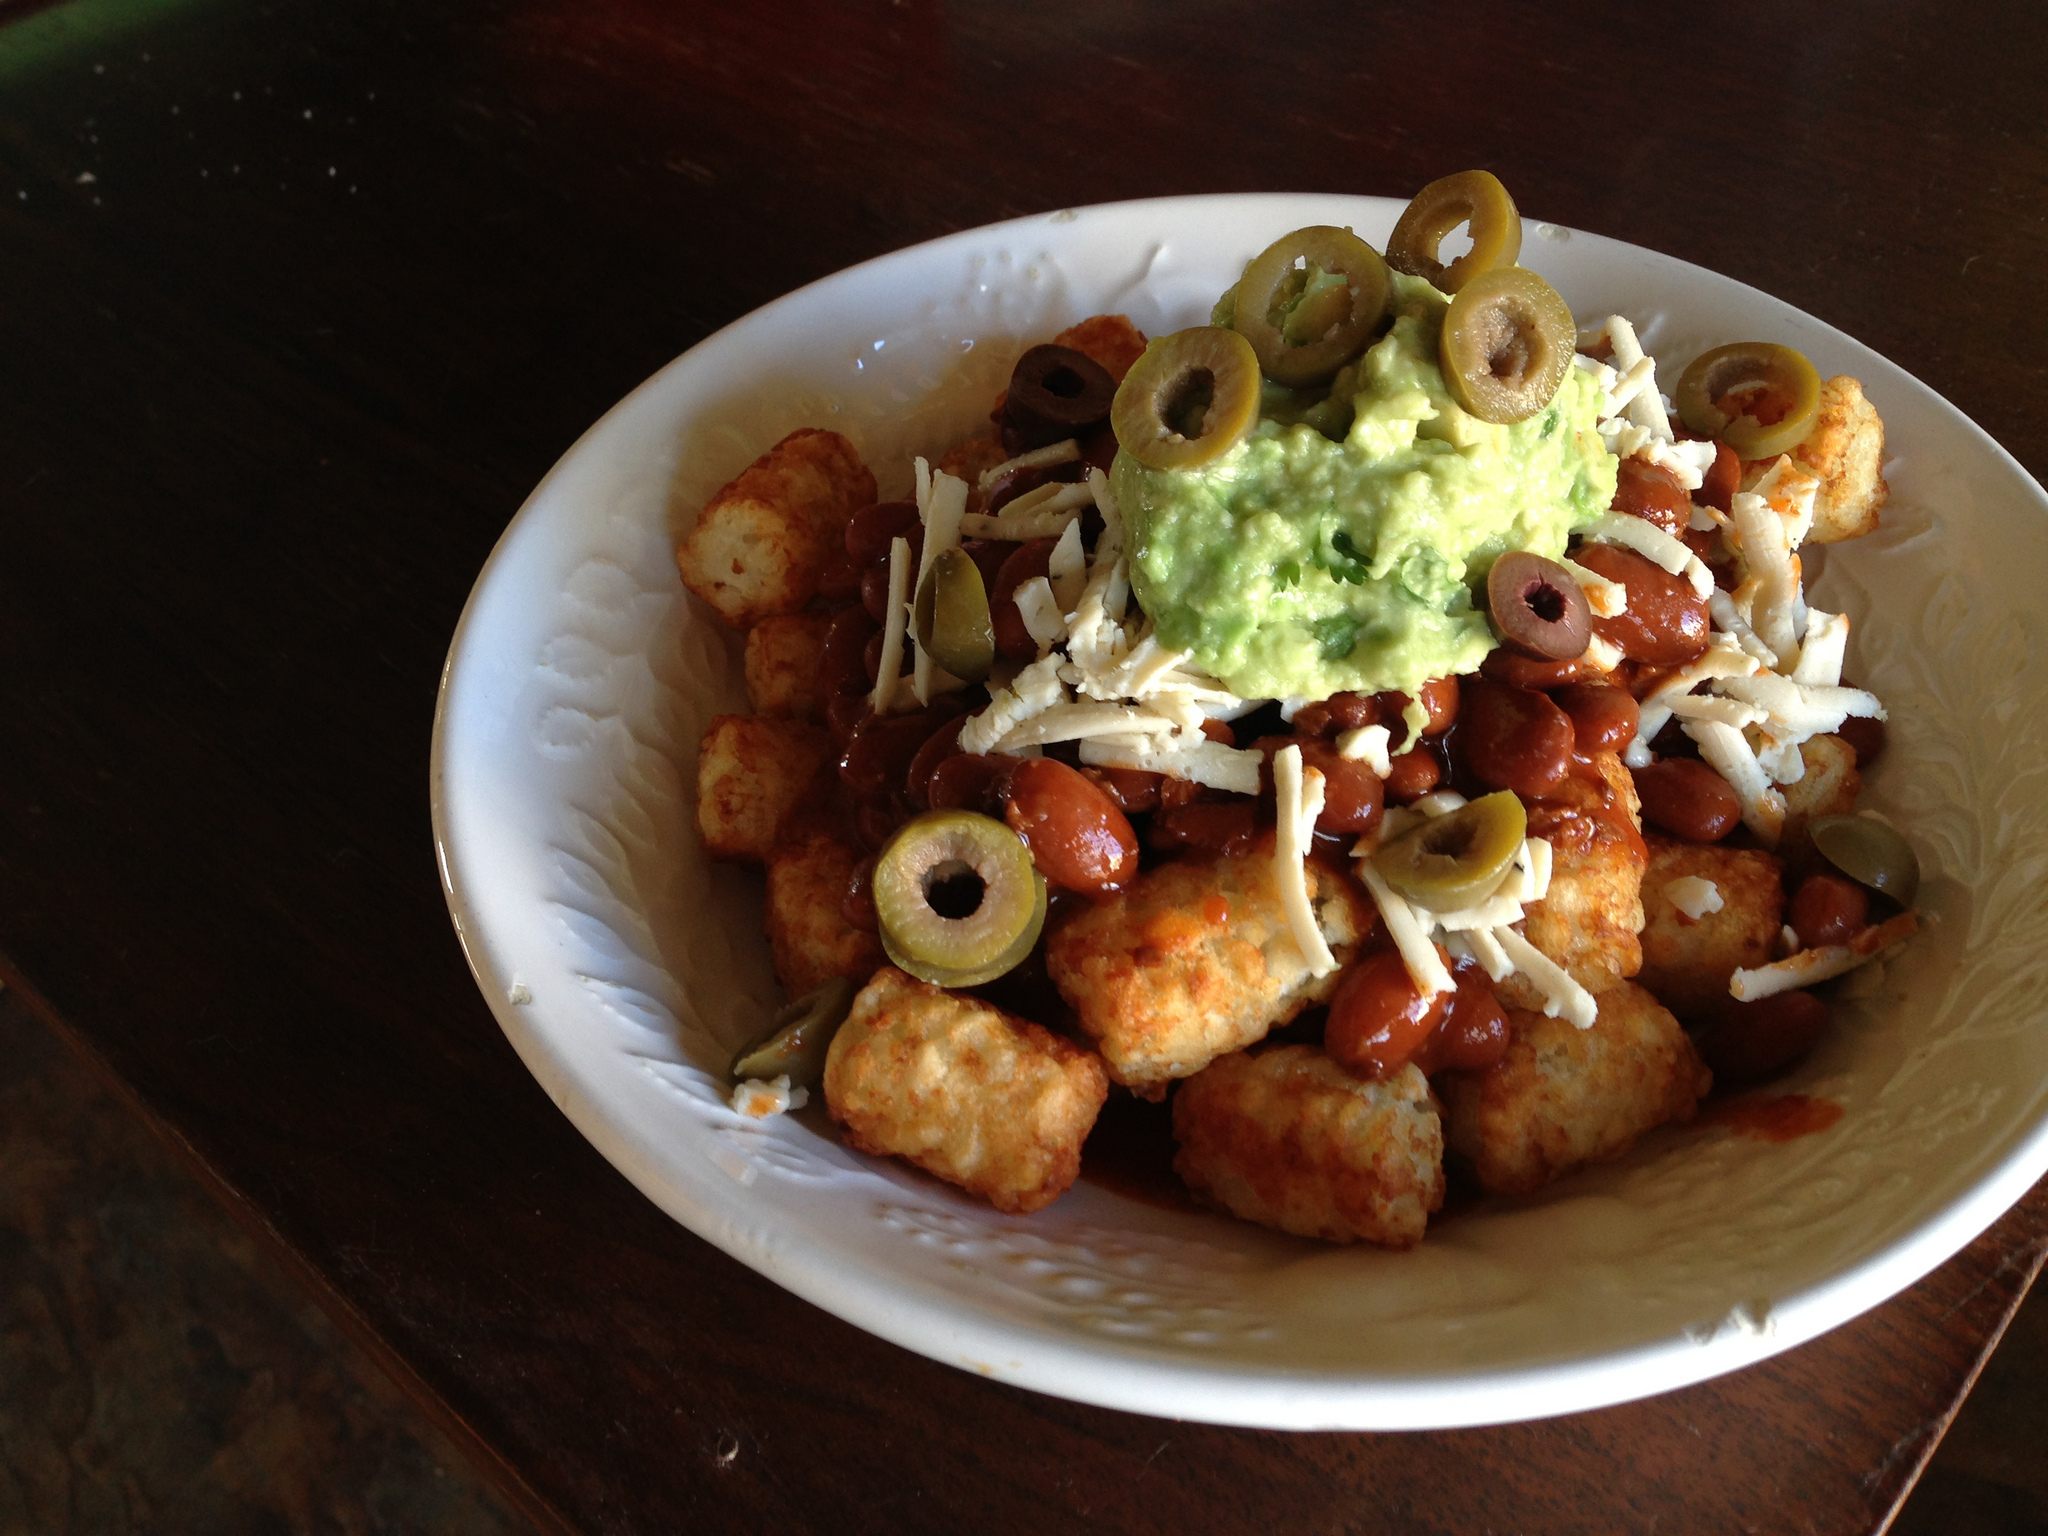 The Amazing History of How Tater Tots Became an American Favorite - Pitco